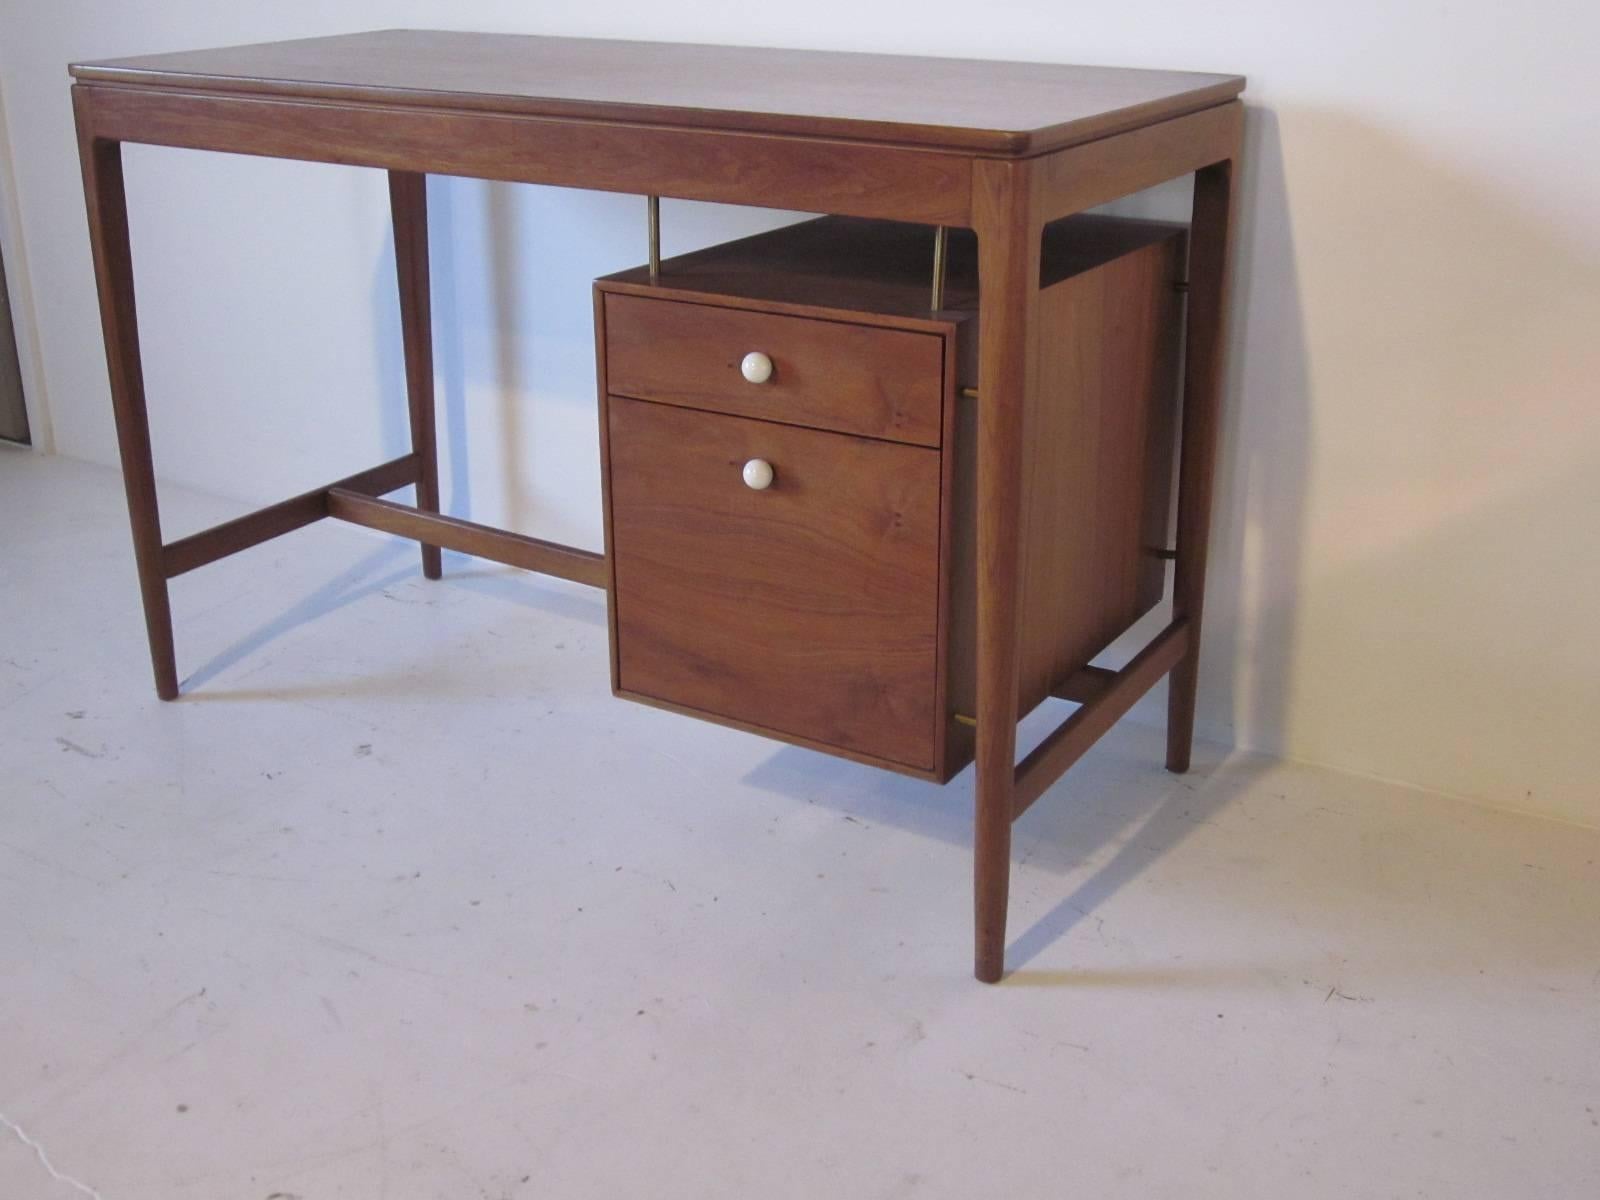 A medium colored walnut desk with hanging drawer and file box , brass details and white porcelain pulls. A great designed desk for a small space or home office, manufactured by the Drexel Furniture Company.